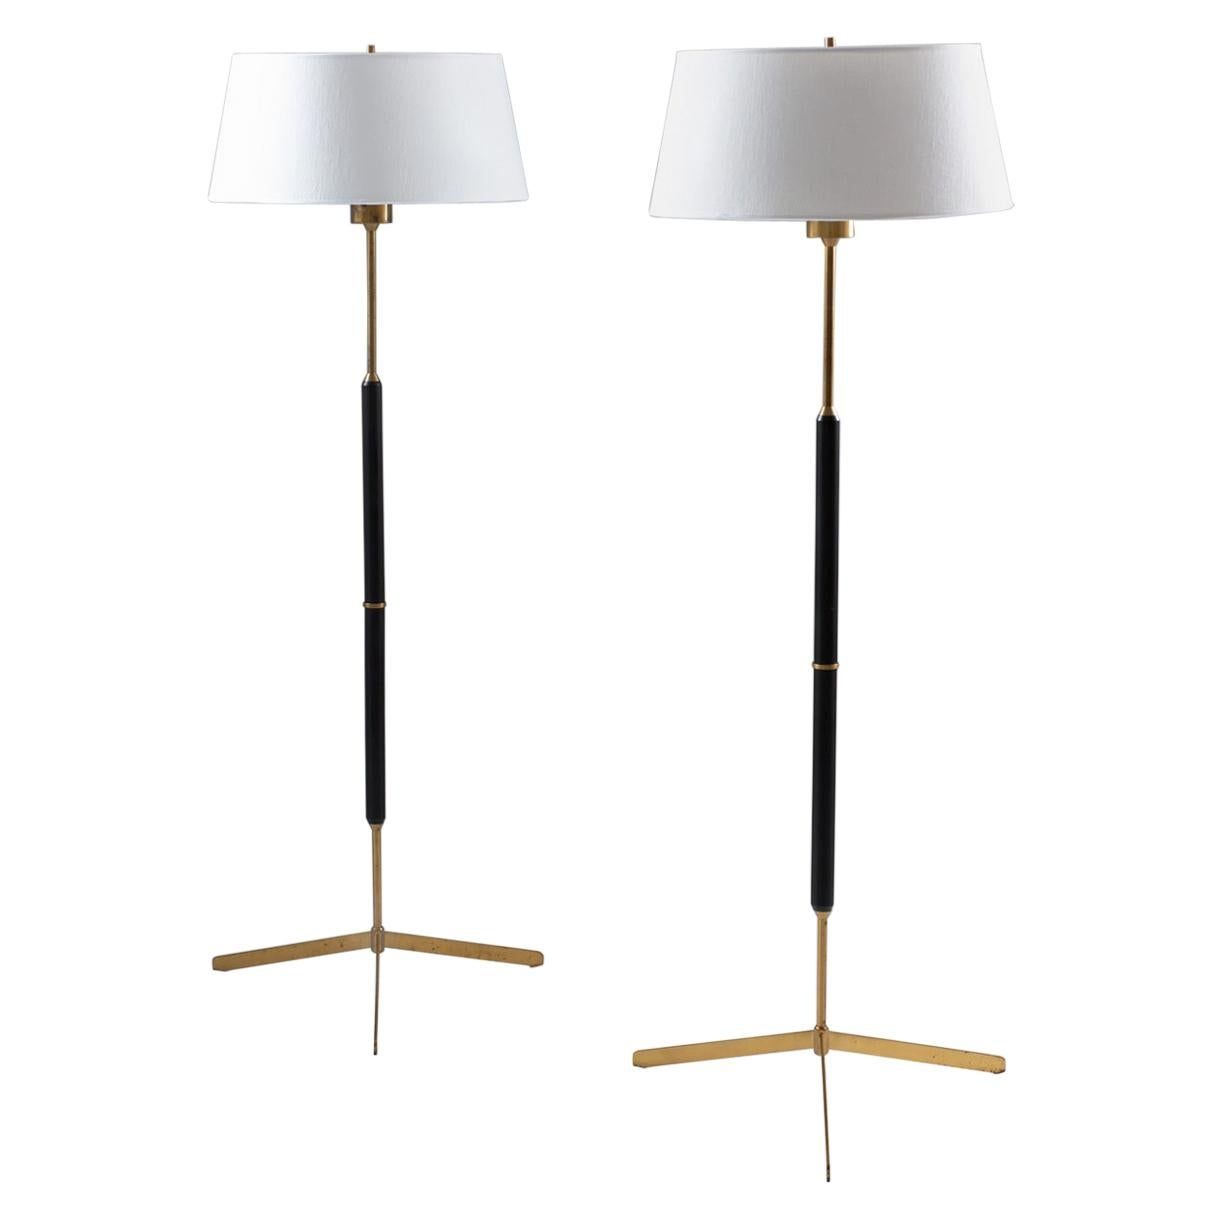 Scandinavian Midcentury Floor Lamps In Brass And Woodbergboms, Sweden  For Sale At 1stdibs | Mid Century Modern Floor Lamp, Scandanavian Floor Lamp Inside Mid Century Floor Lamps (Photo 14 of 15)